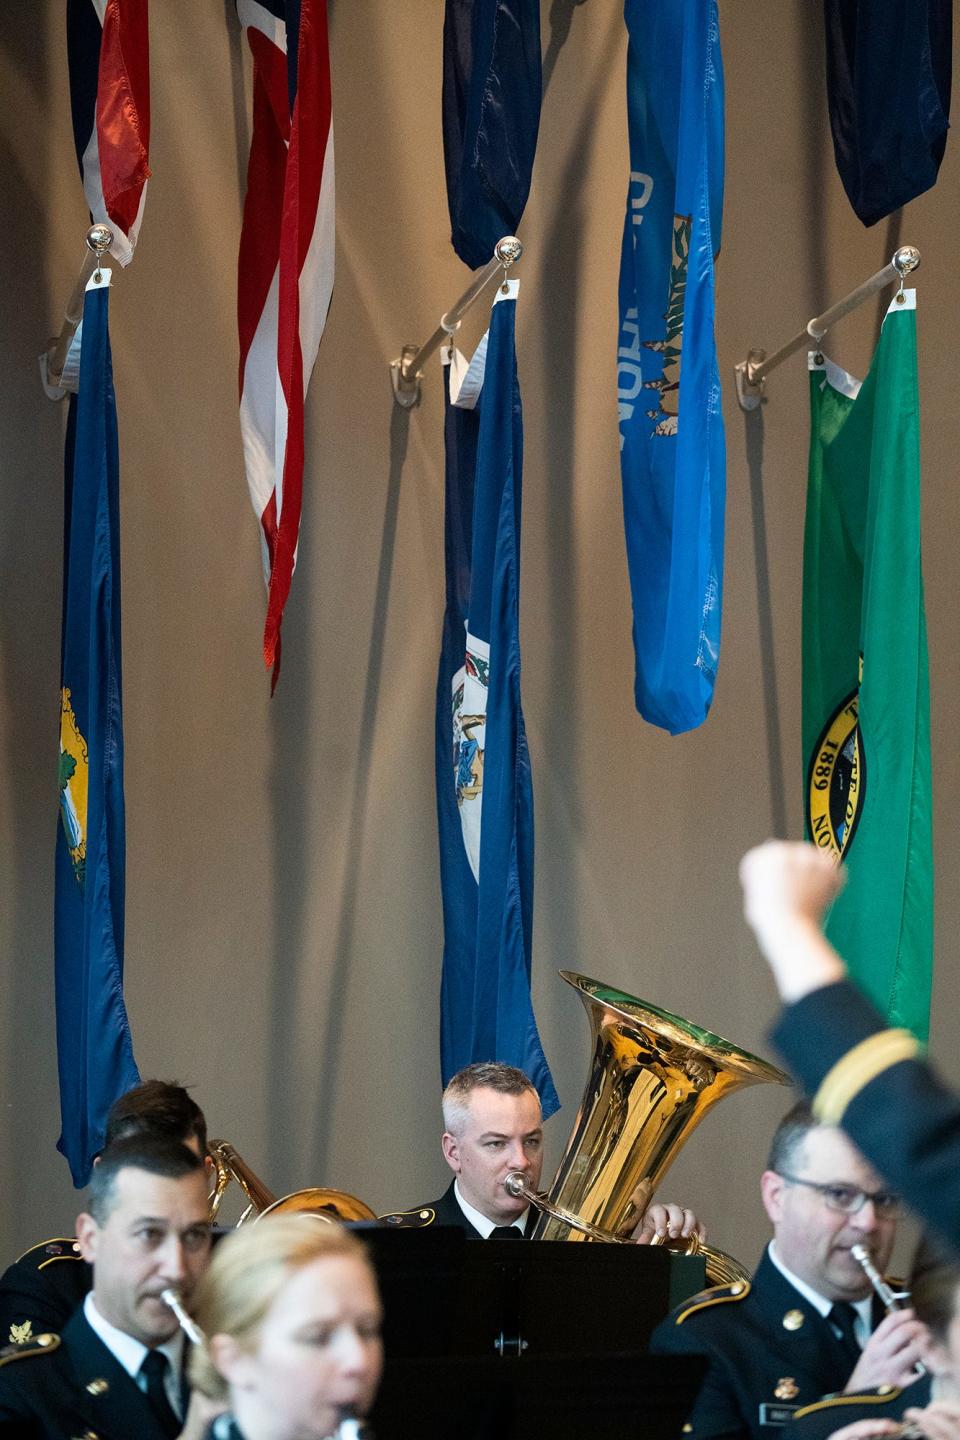 The 338th U.S. Army Band opens the annual Veterans Day ceremony Friday, Nov. 11, 2022 at the National Veterans Memorial and Museum in Columbus with music.